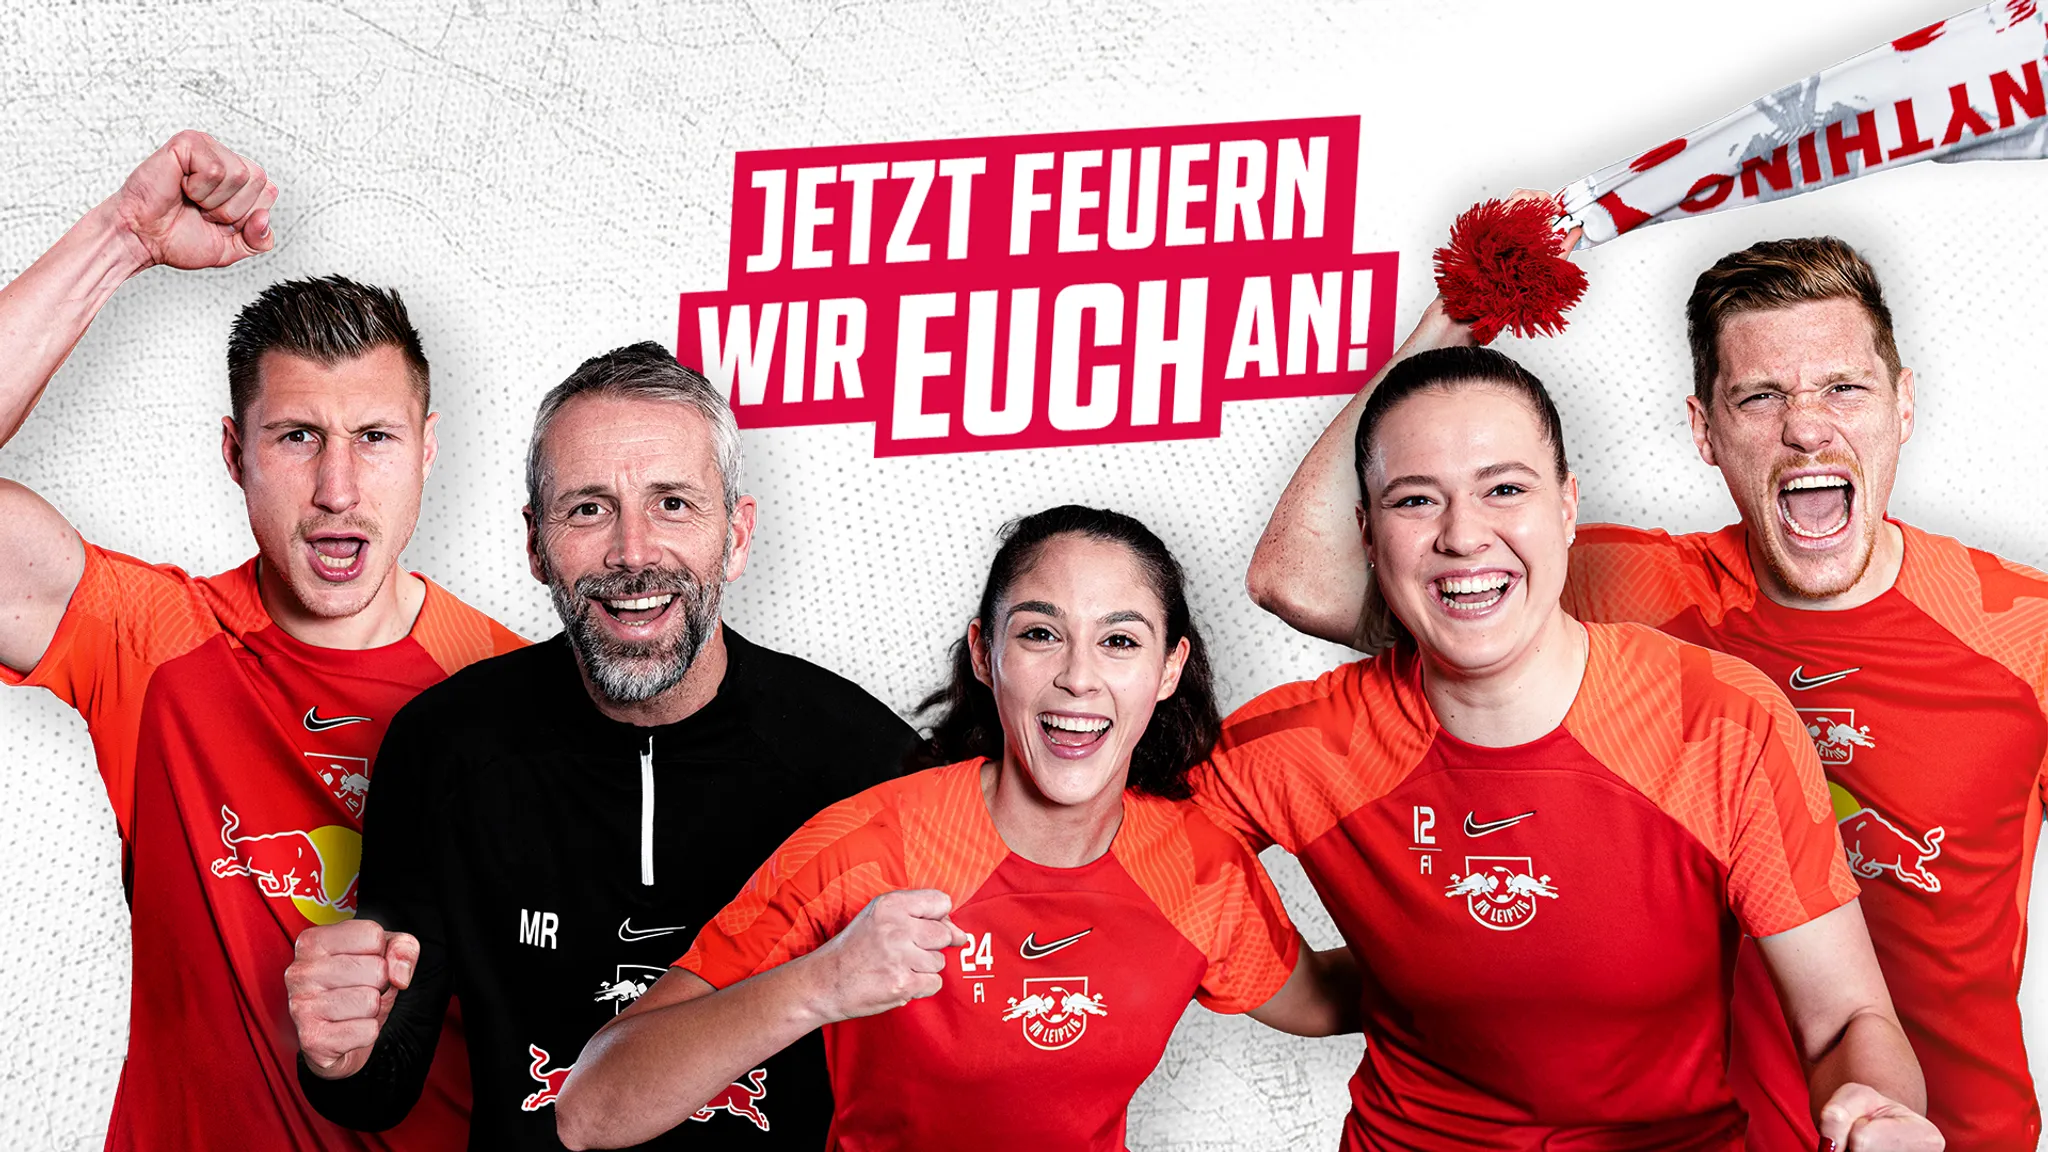 Wings for Life World Run am 07. Mai 2023 in Leipzig.